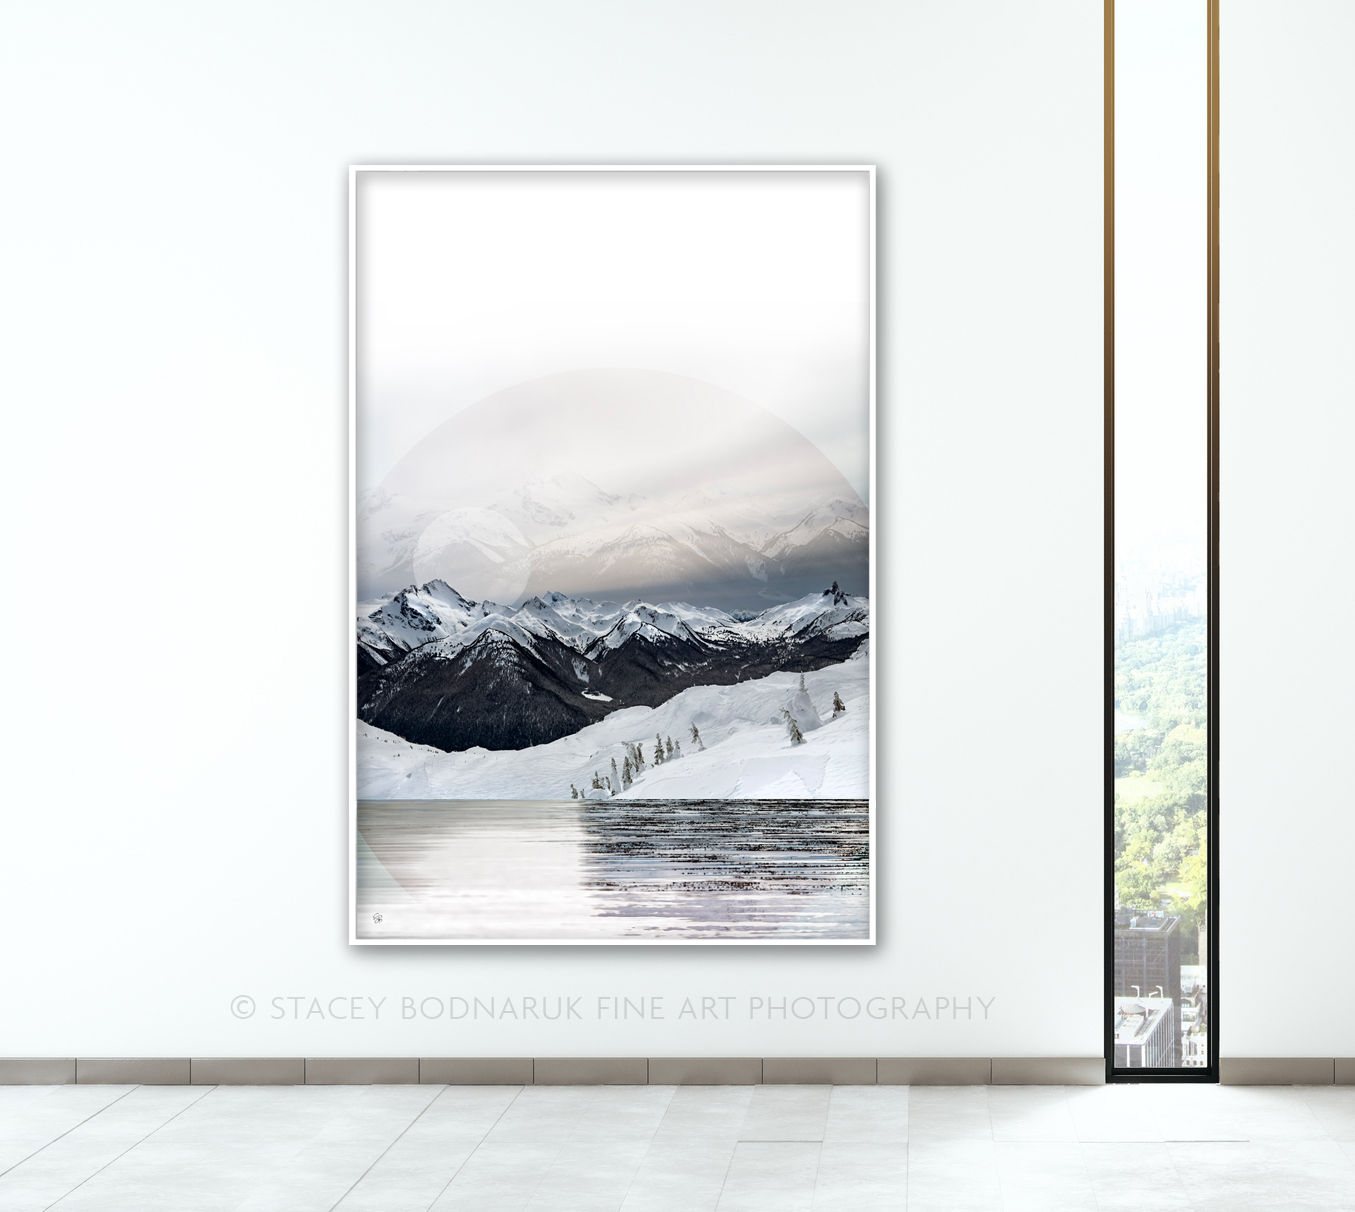 Echo, original mountain landscape photograph by Stacey Bodnaruk at Effusion Art Gallery in Invermere, BC.